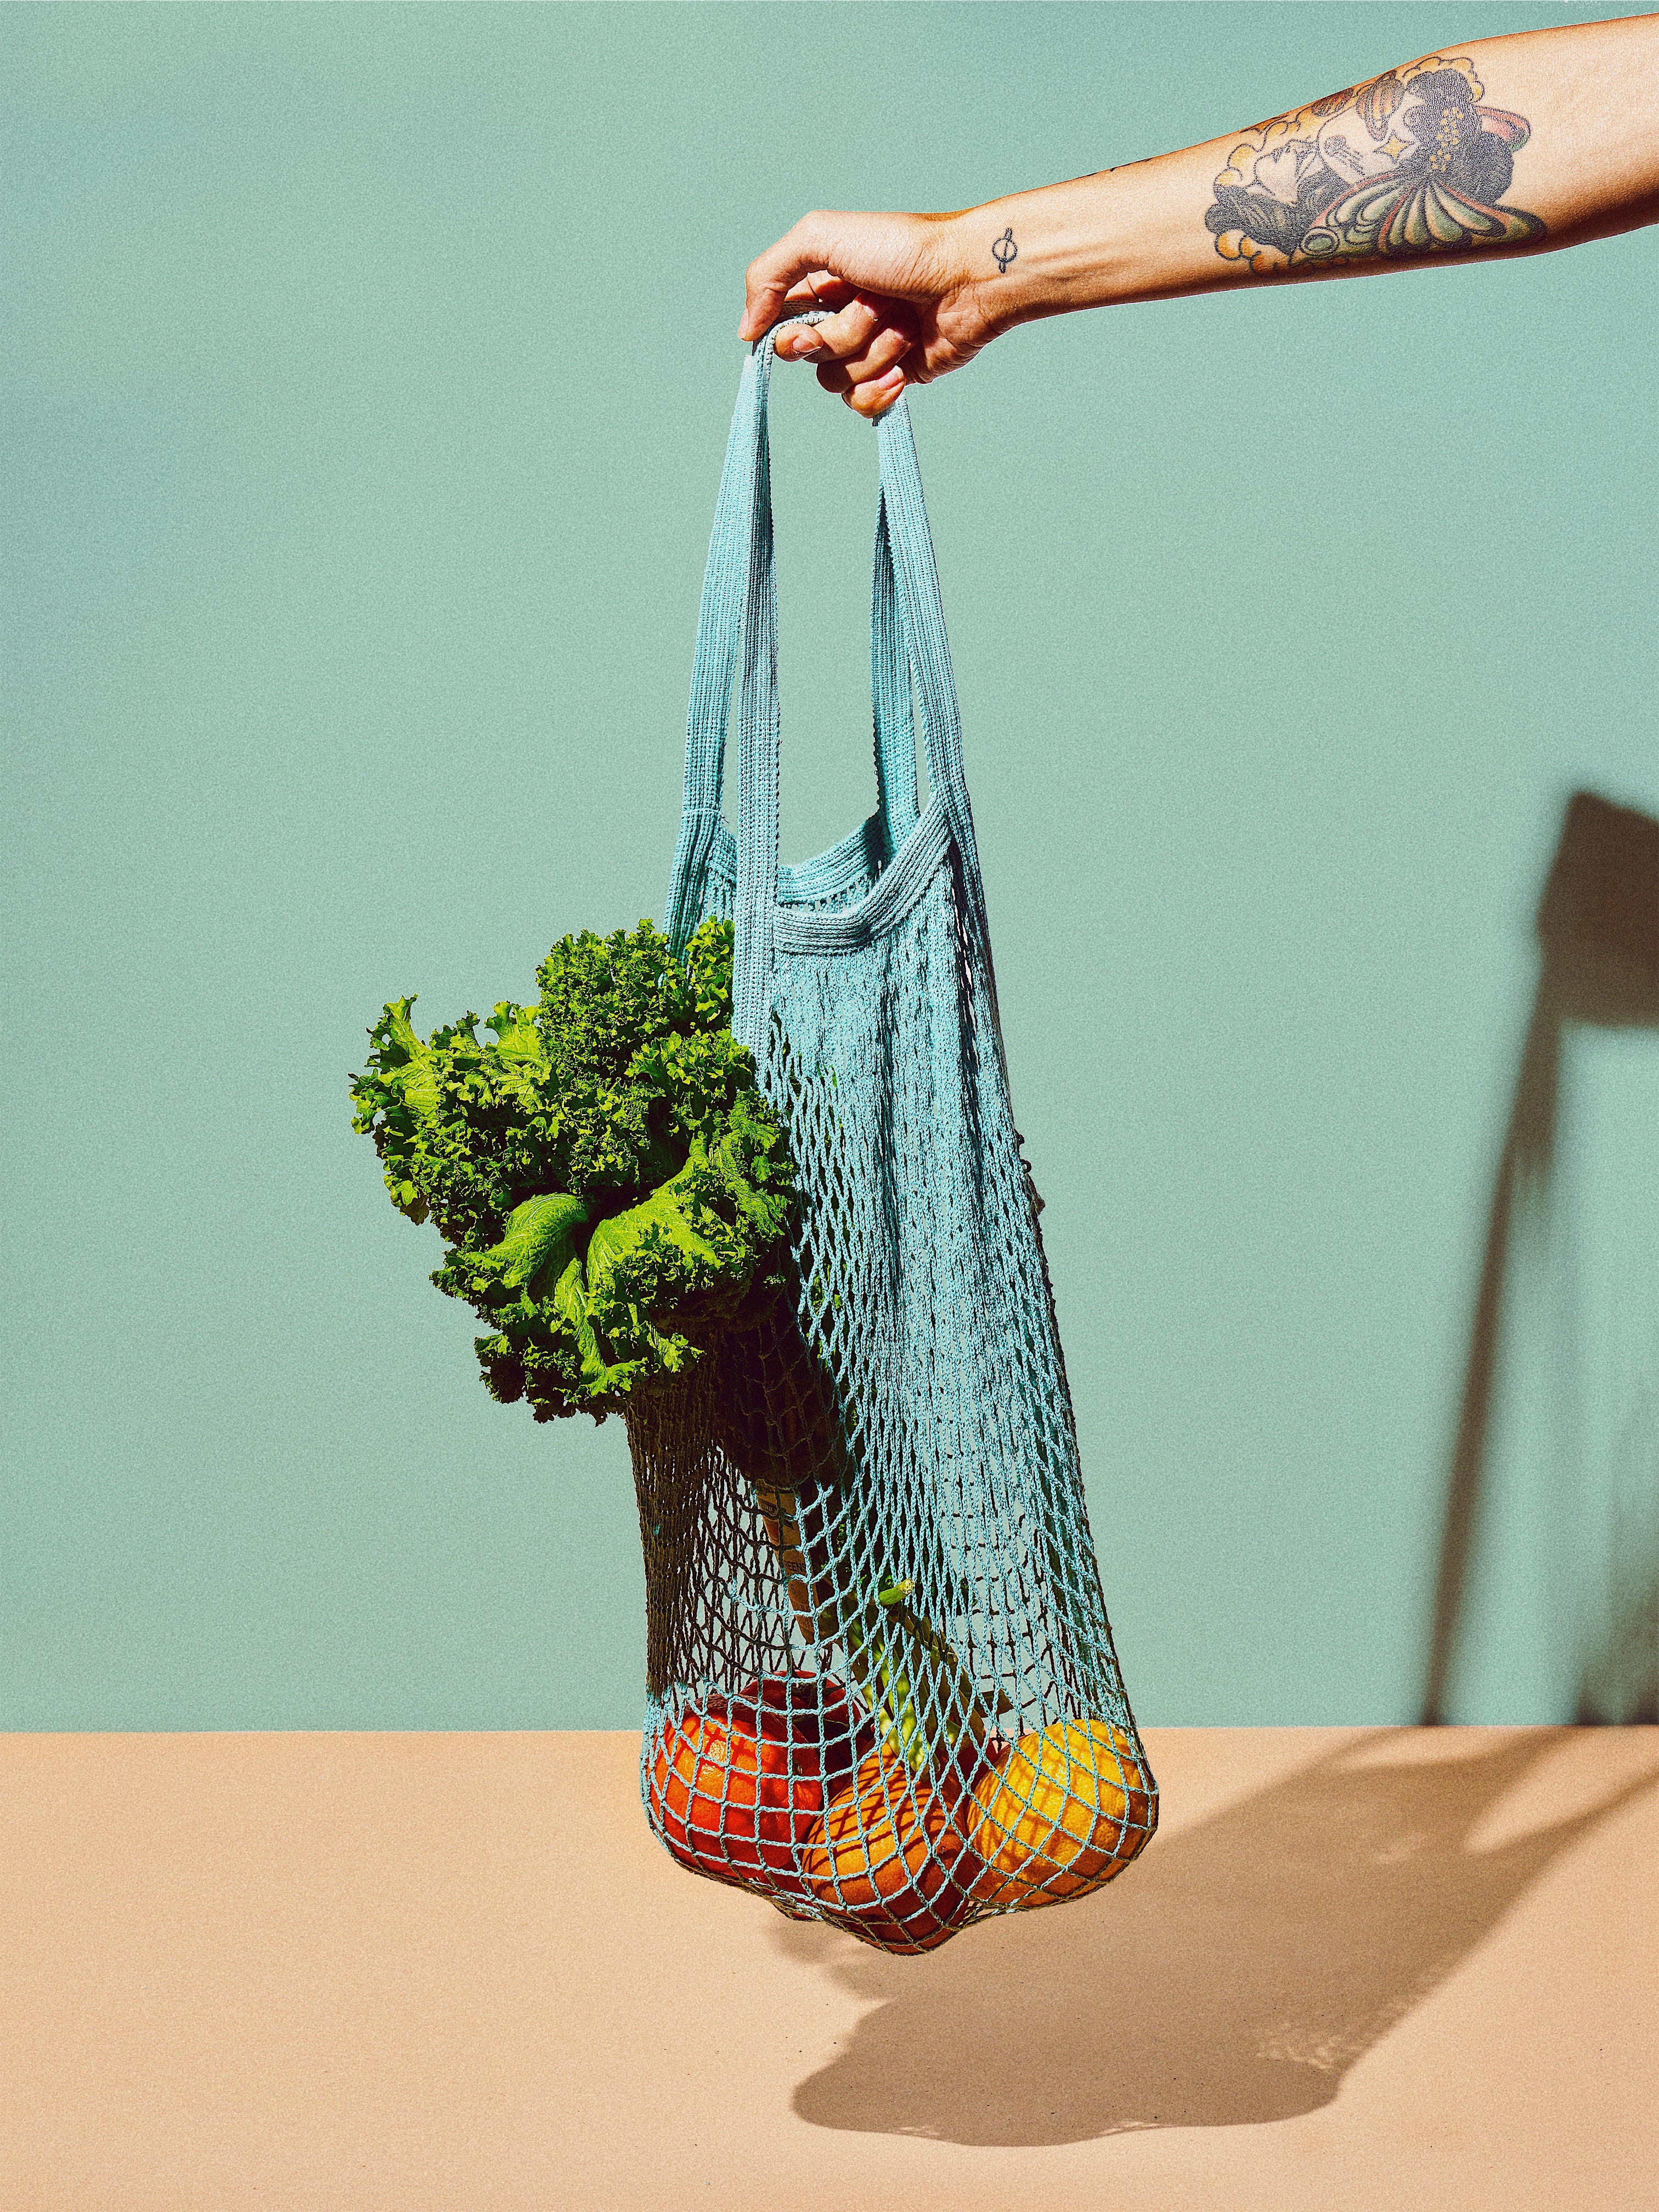 Allies of Mother Earth - Reusable Bag photo by Jack Strutz